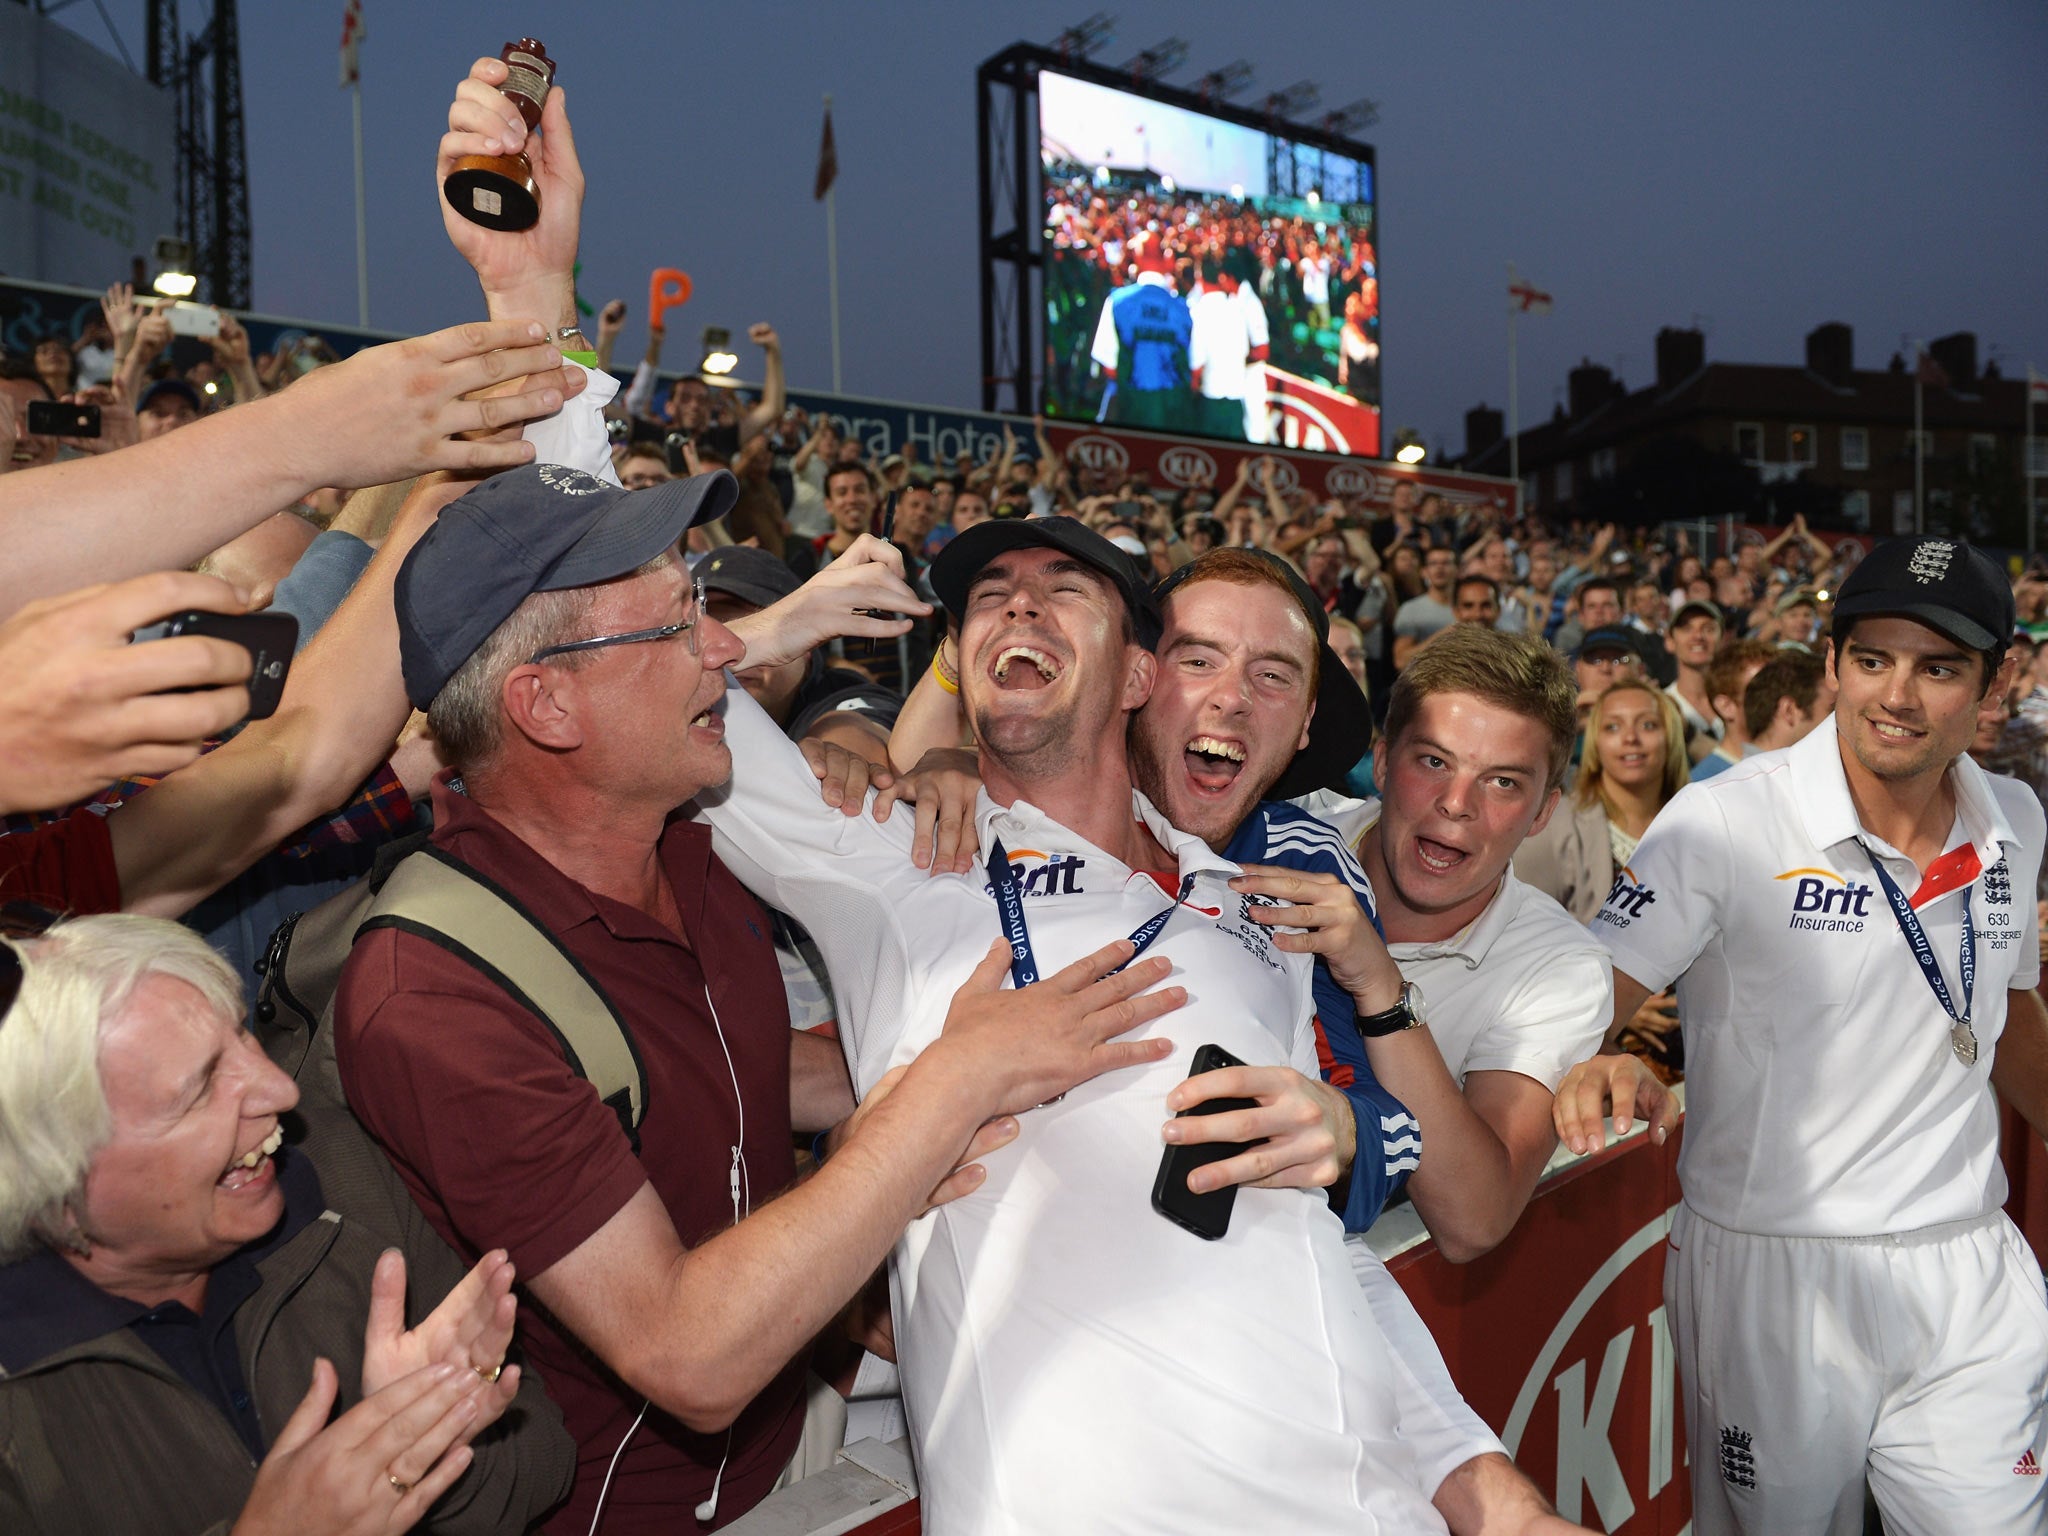 Kevin Pietersen and Alastair Cook of England celebrate with fans after England won the Ashes